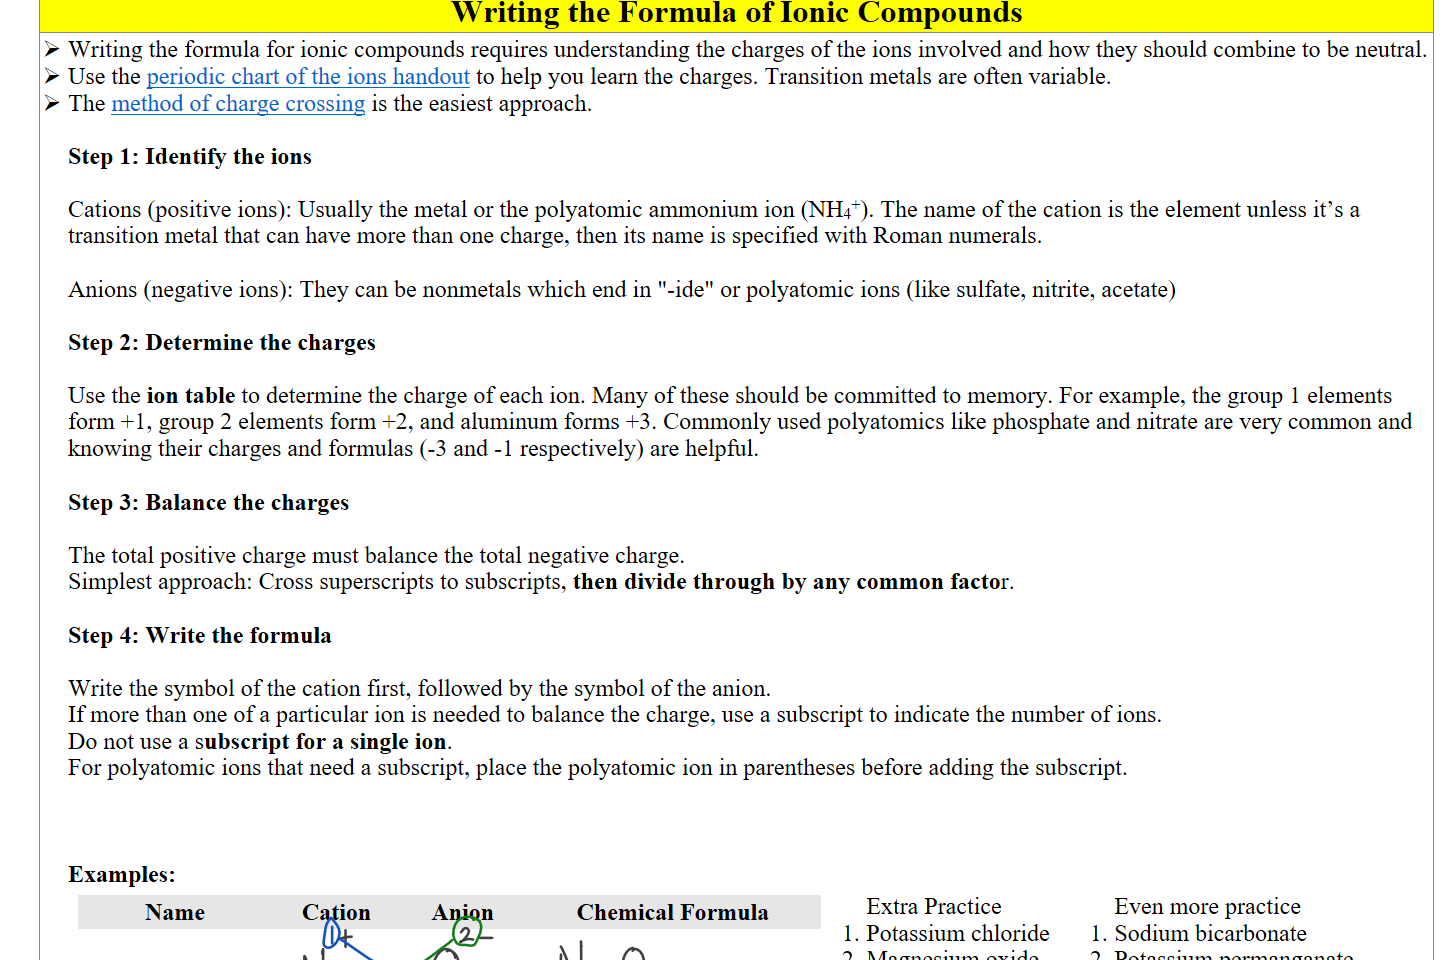 Writing the Formula of Ionic Compounds
Writing the formula for ionic compounds requires understanding the charges of the ions involved and how they should combine to be neutral.
Use the ﷟HYPERLINK "https://boisestatecanvas.instructure.com/courses/28699/modules/items/2876744"periodic chart of the ions handout to help you learn the charges. Transition metals are often variable.
The ﷟HYPERLINK "https://boisestatecanvas.instructure.com/courses/28699/modules/items/2985506"method of charge crossing is the easiest approach.

Step 1: Identify the ions

Cations (positive ions): Usually the metal or the polyatomic ammonium ion (NH4+). The name of the cation is the element unless it’s a transition metal that can have more than one charge, then its name is specified with Roman numerals.

Anions (negative ions): They can be nonmetals which end in "-ide" or polyatomic ions (like sulfate, nitrite, acetate)

Step 2: Determine the charges

Use the ion table to determine the charge of each ion. Many of these should be committed to memory. For example, the group 1 elements form +1, group 2 elements form +2, and aluminum forms +3. Commonly used polyatomics like phosphate and nitrate are very common and knowing their charges and formulas (-3 and -1 respectively) are helpful.

Step 3: Balance the charges

The total positive charge must balance the total negative charge. 
Simplest approach: Cross superscripts to subscripts, then divide through by any common factor.

Step 4: Write the formula

Write the symbol of the cation first, followed by the symbol of the anion.
If more than one of a particular ion is needed to balance the charge, use a subscript to indicate the number of ions. 
Do not use a subscript for a single ion. 
For polyatomic ions that need a subscript, place the polyatomic ion in parentheses before adding the subscript.



Examples:
Name
Cation
Anion
Chemical Formula
 
sodium oxide



Extra Practice
Potassium chloride
Magnesium oxide
Even more practice
Sodium bicarbonate
Potassium permanganate
Ink Drawings
Ink Drawings
Ink Drawings
Ink Drawings
Ink Drawings
Ink Drawings
Ink Drawings
Ink Drawings
Ink Drawings
Ink Drawings
Ink Drawings
Ink Drawings
Ink Drawings
Ink Drawings
Ink Drawings
